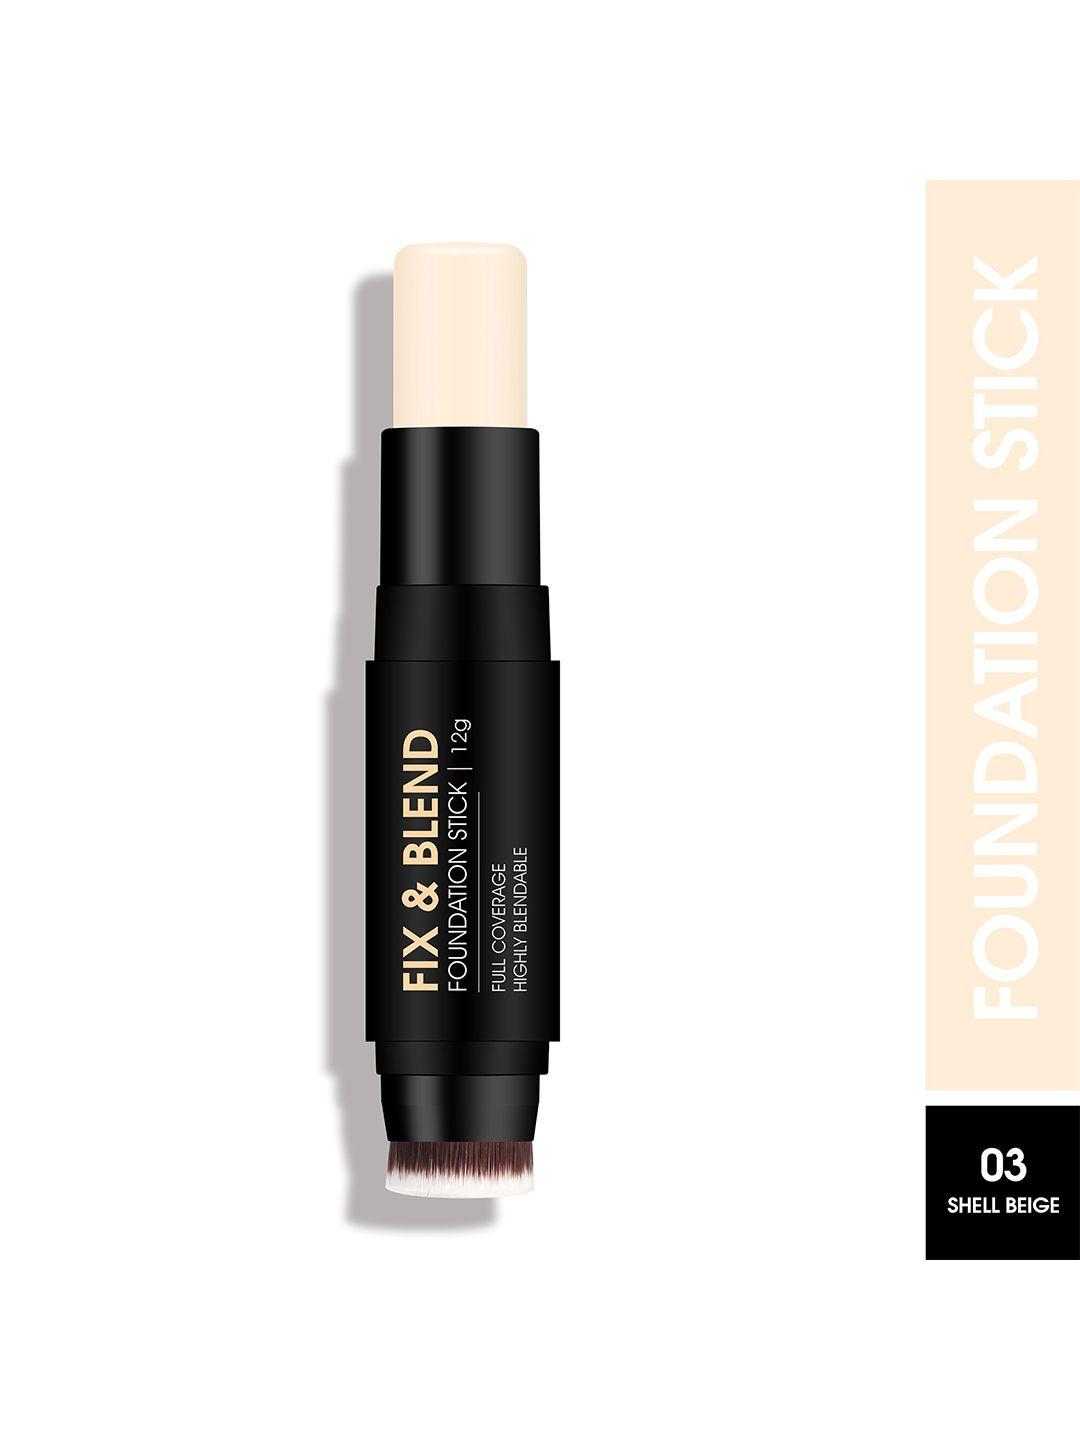 colors queen fix & blend oil free foundation stick 12 g - shell beige 03